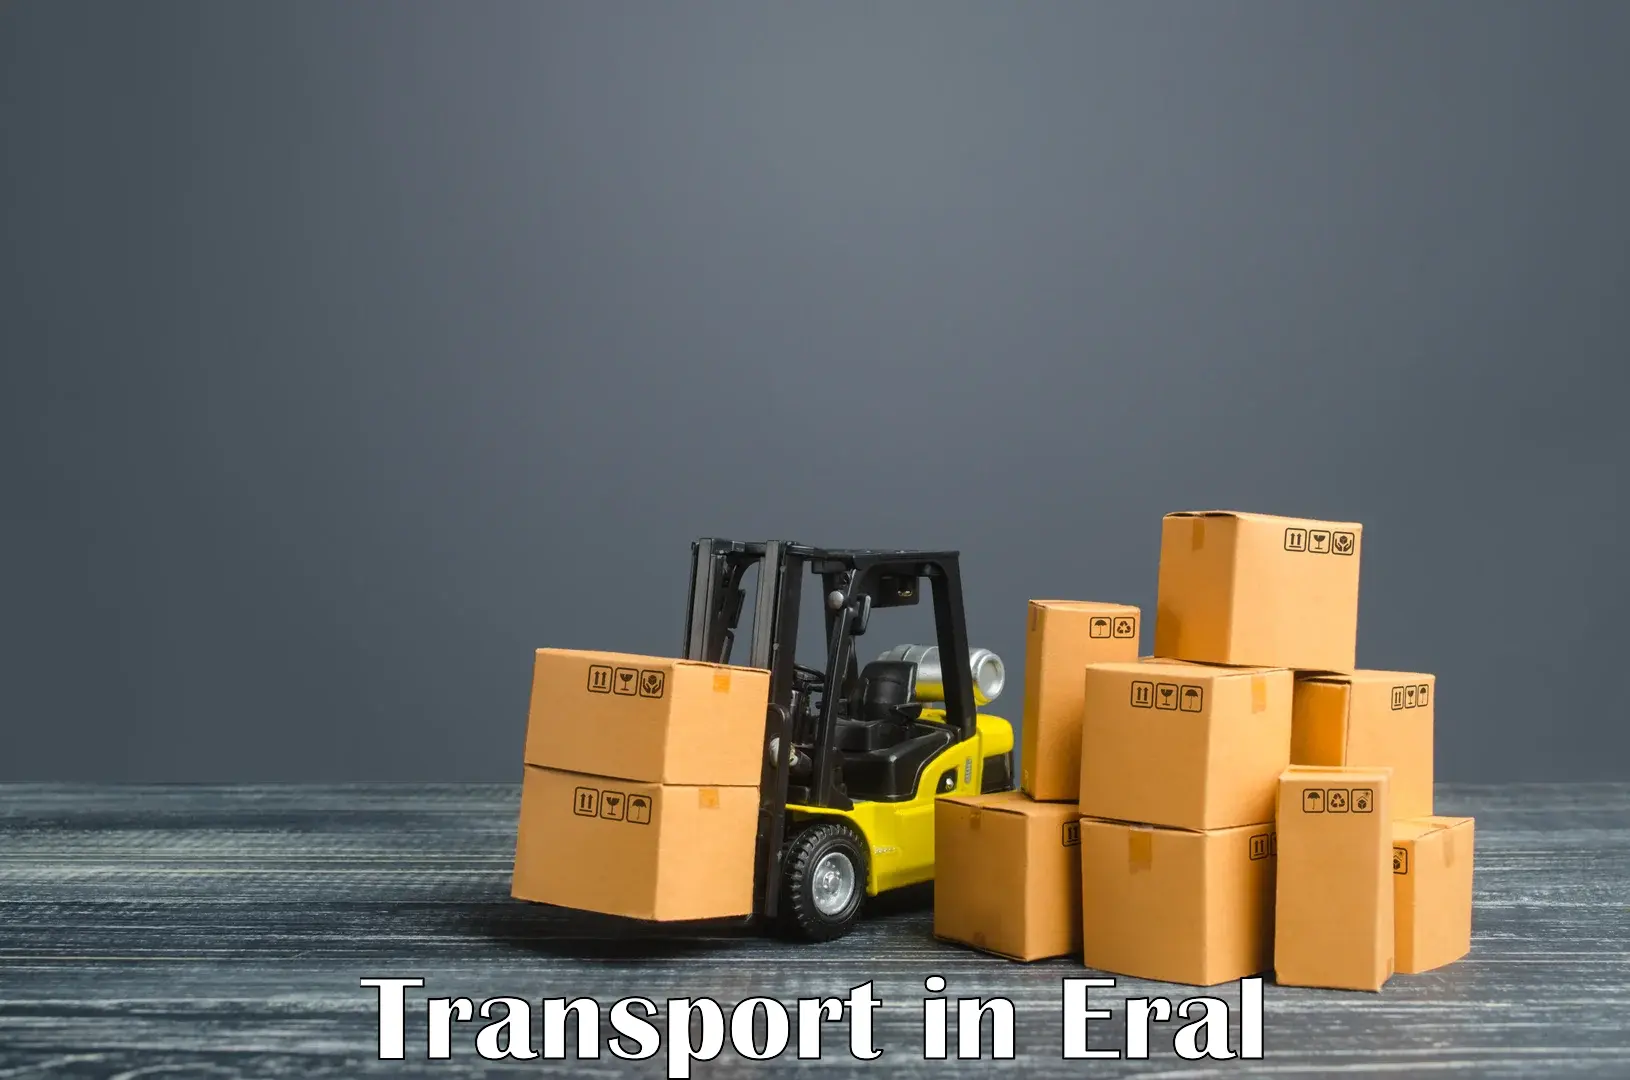 Two wheeler transport services in Eral